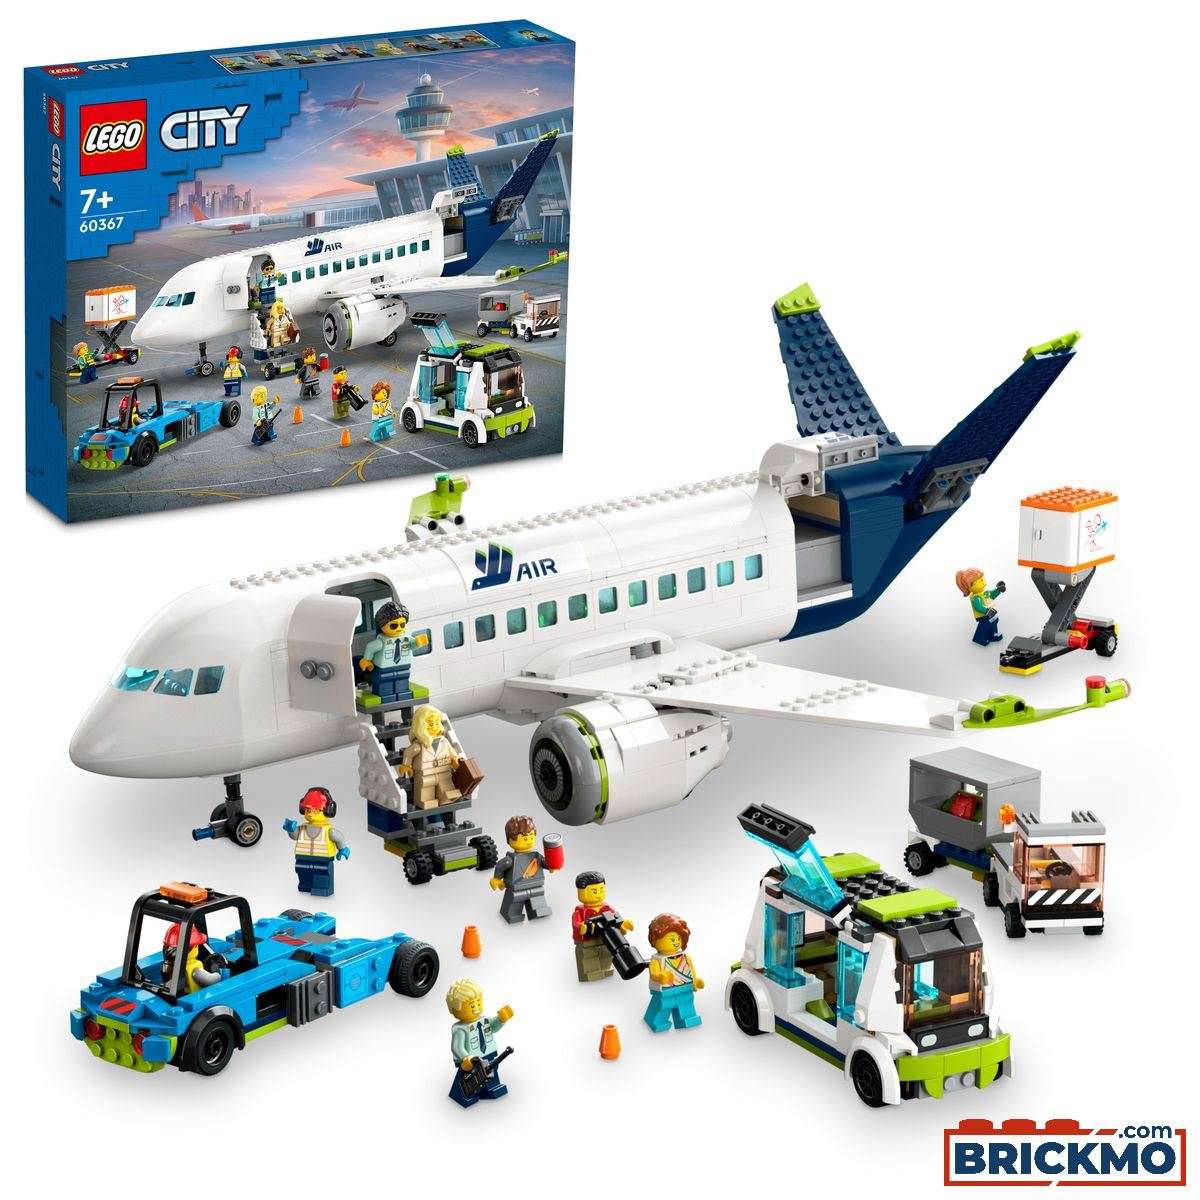 LEGO City 60367 Passagerfly 60367